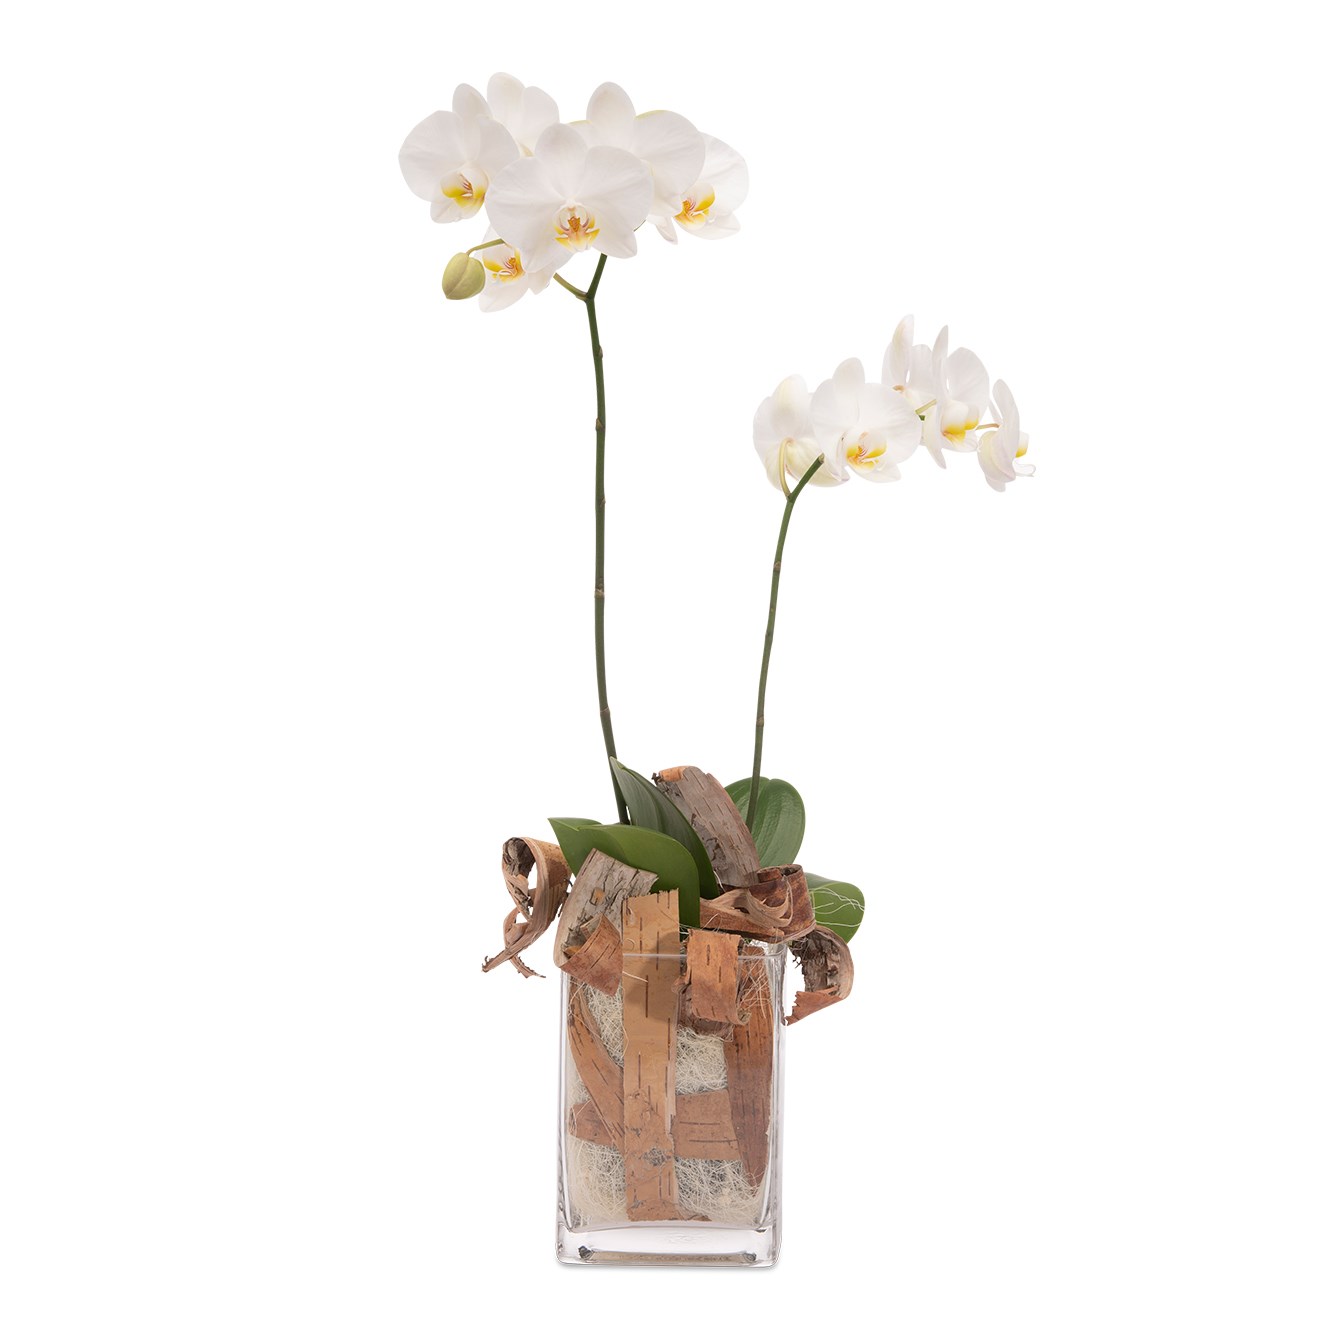 Floral arrangement with white orchid